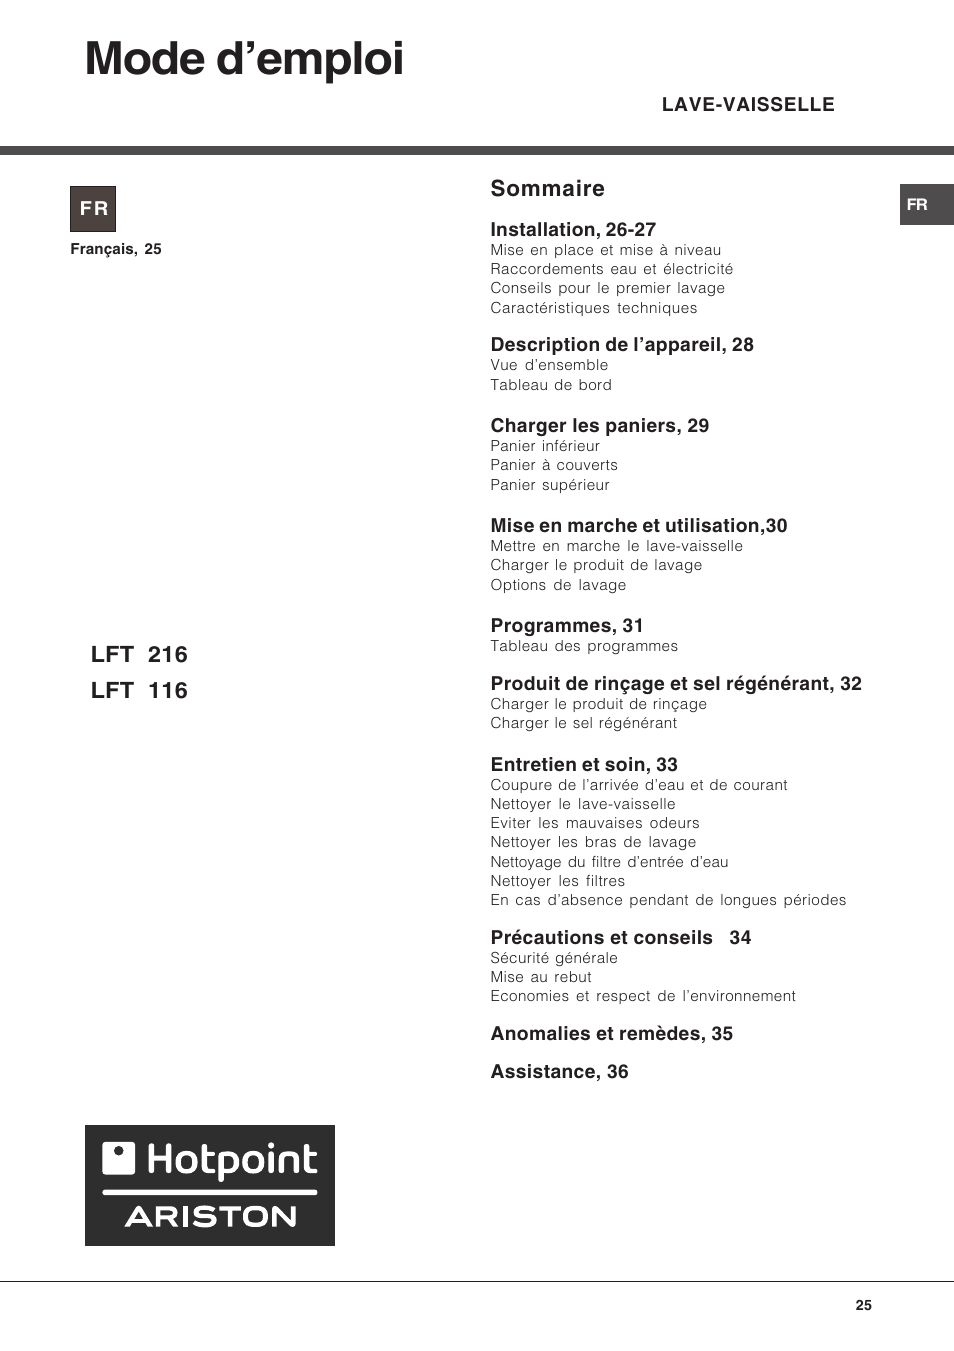 Mode d'emploi, Sommaire | Hotpoint Ariston LFT 216 User Manual | Page 25 /  84